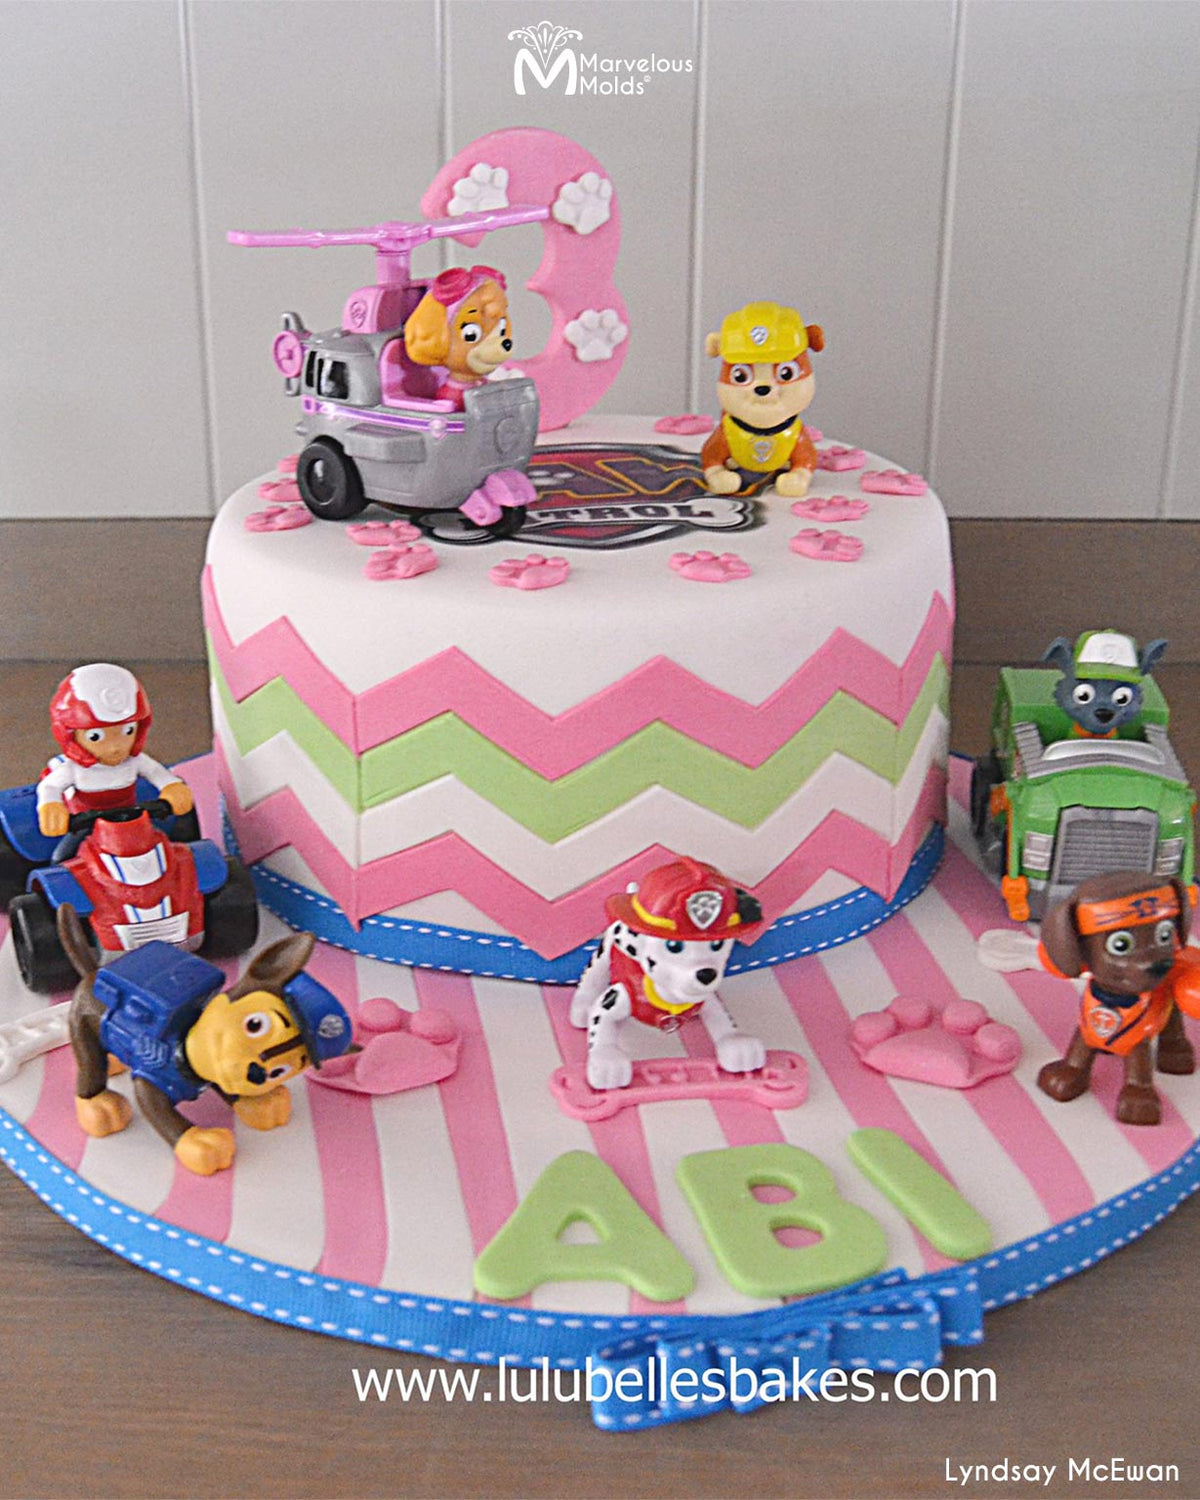 Paw Patrol Themed Birthday Cake Decorated with Marvelous Molds Lrge Chevron Silicone Onlay Ribbon